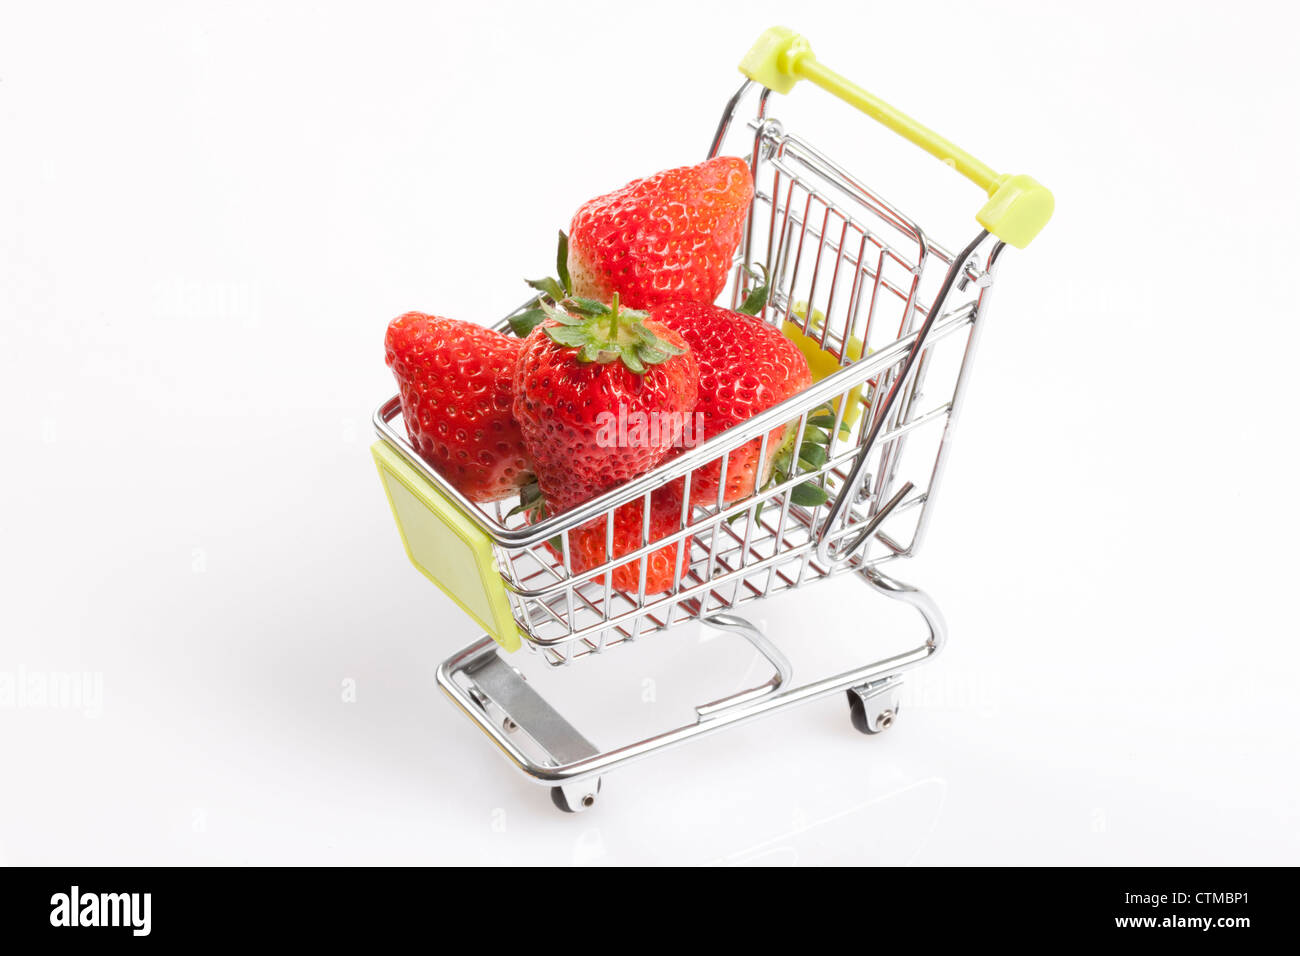 Strawberries in shopping cart Stock Photo